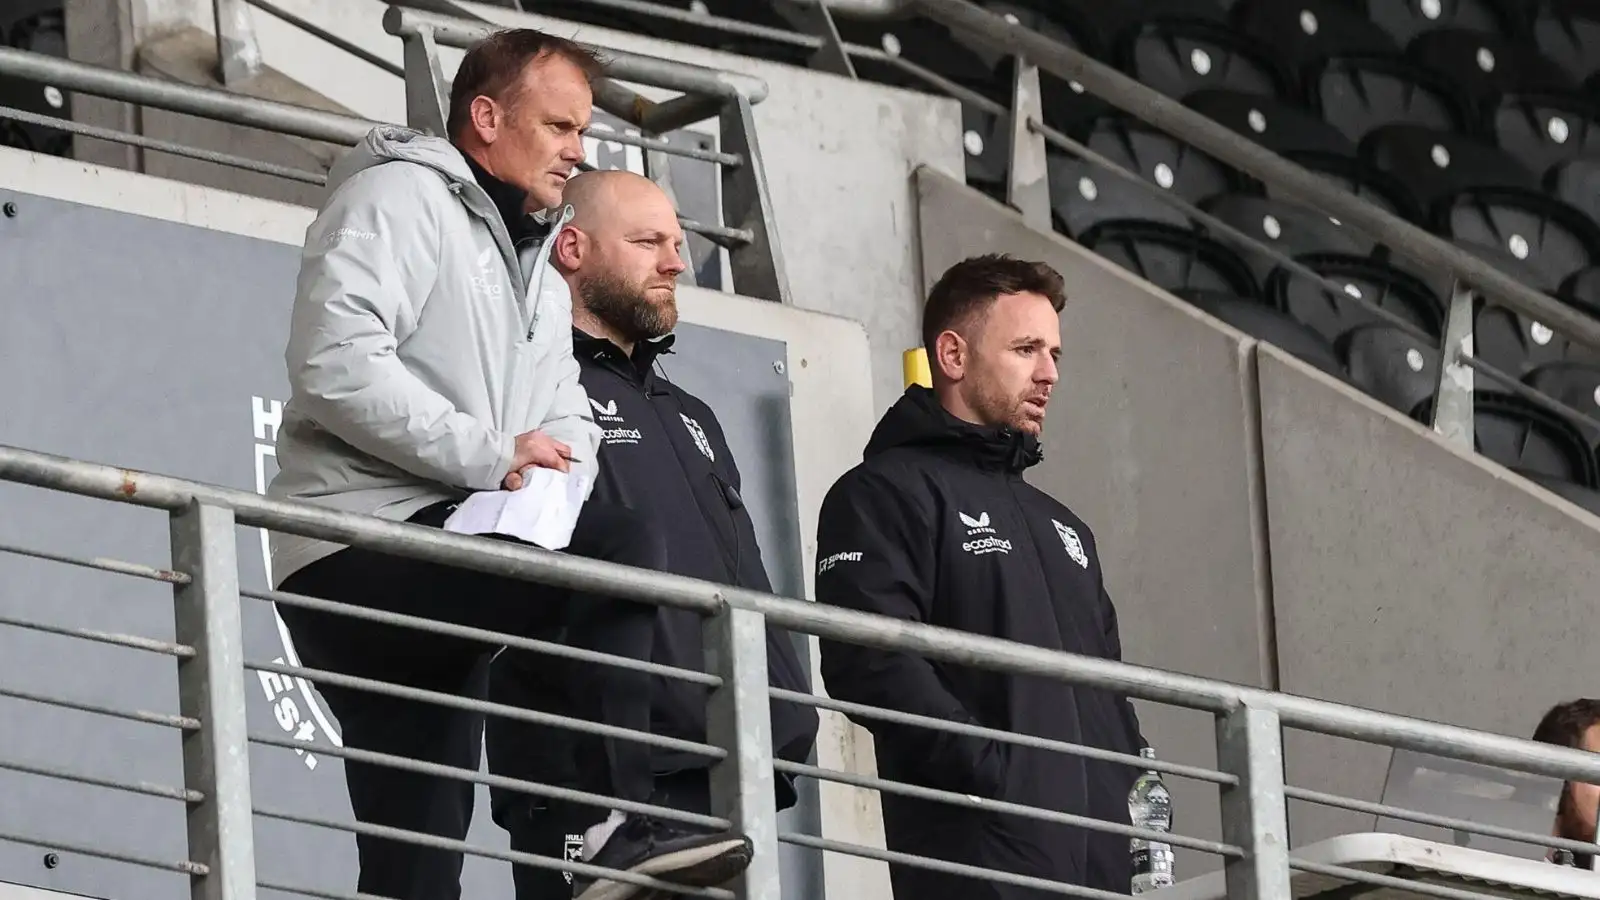 Hull FC’s historic losing run analysed following latest defeat to Castleford Tigers